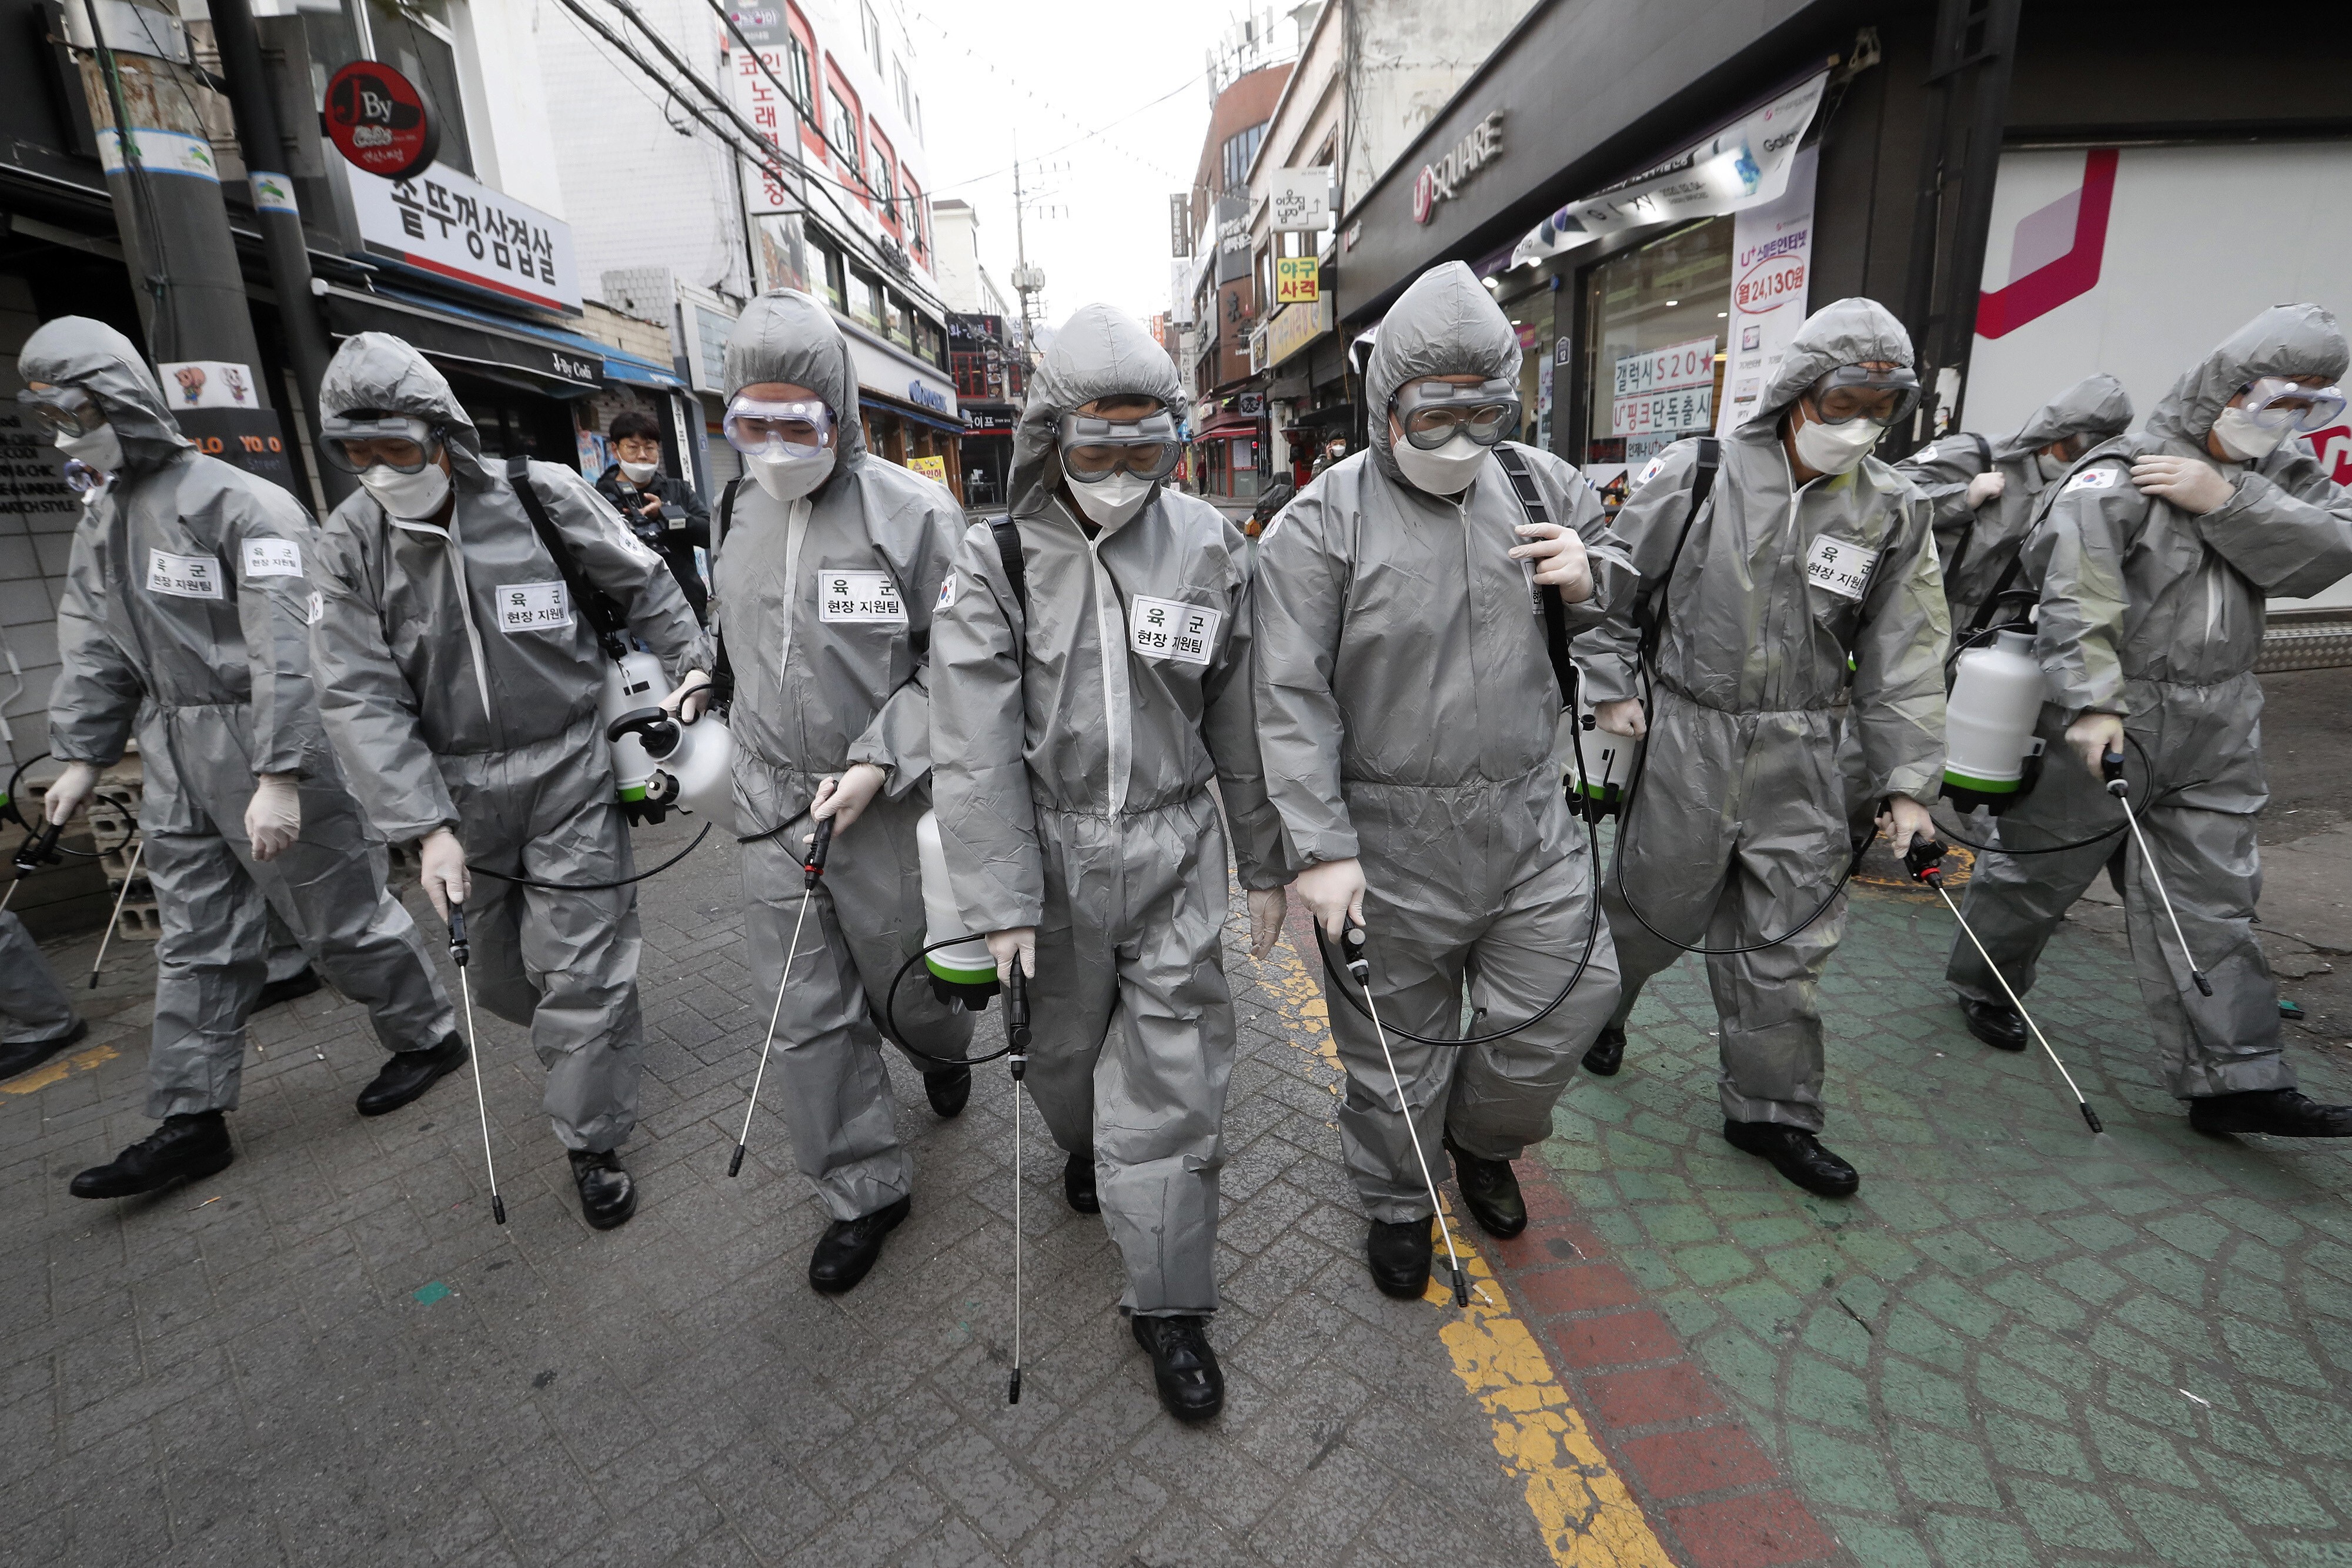 Soldiers wearing protective suits spray disinfectant as a precaution against coronavirus in Seoul, South Korea, on March 4. Photo: AP